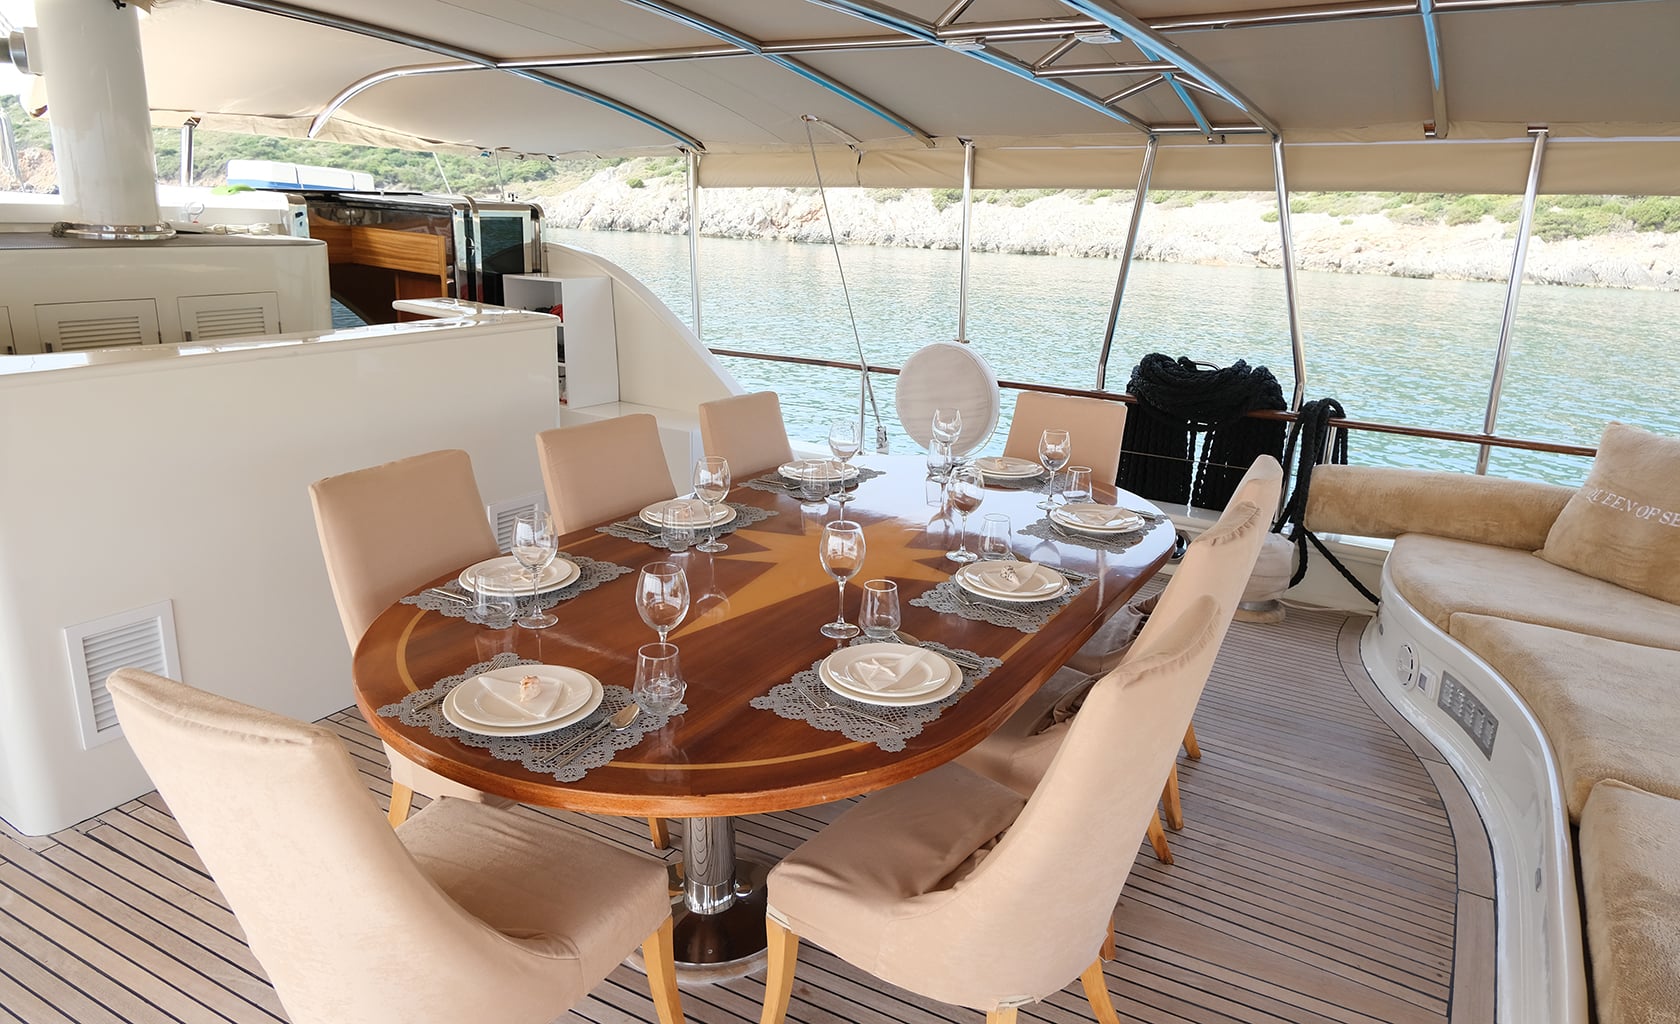 QUEEN OF SEA Dining area on Aft deck